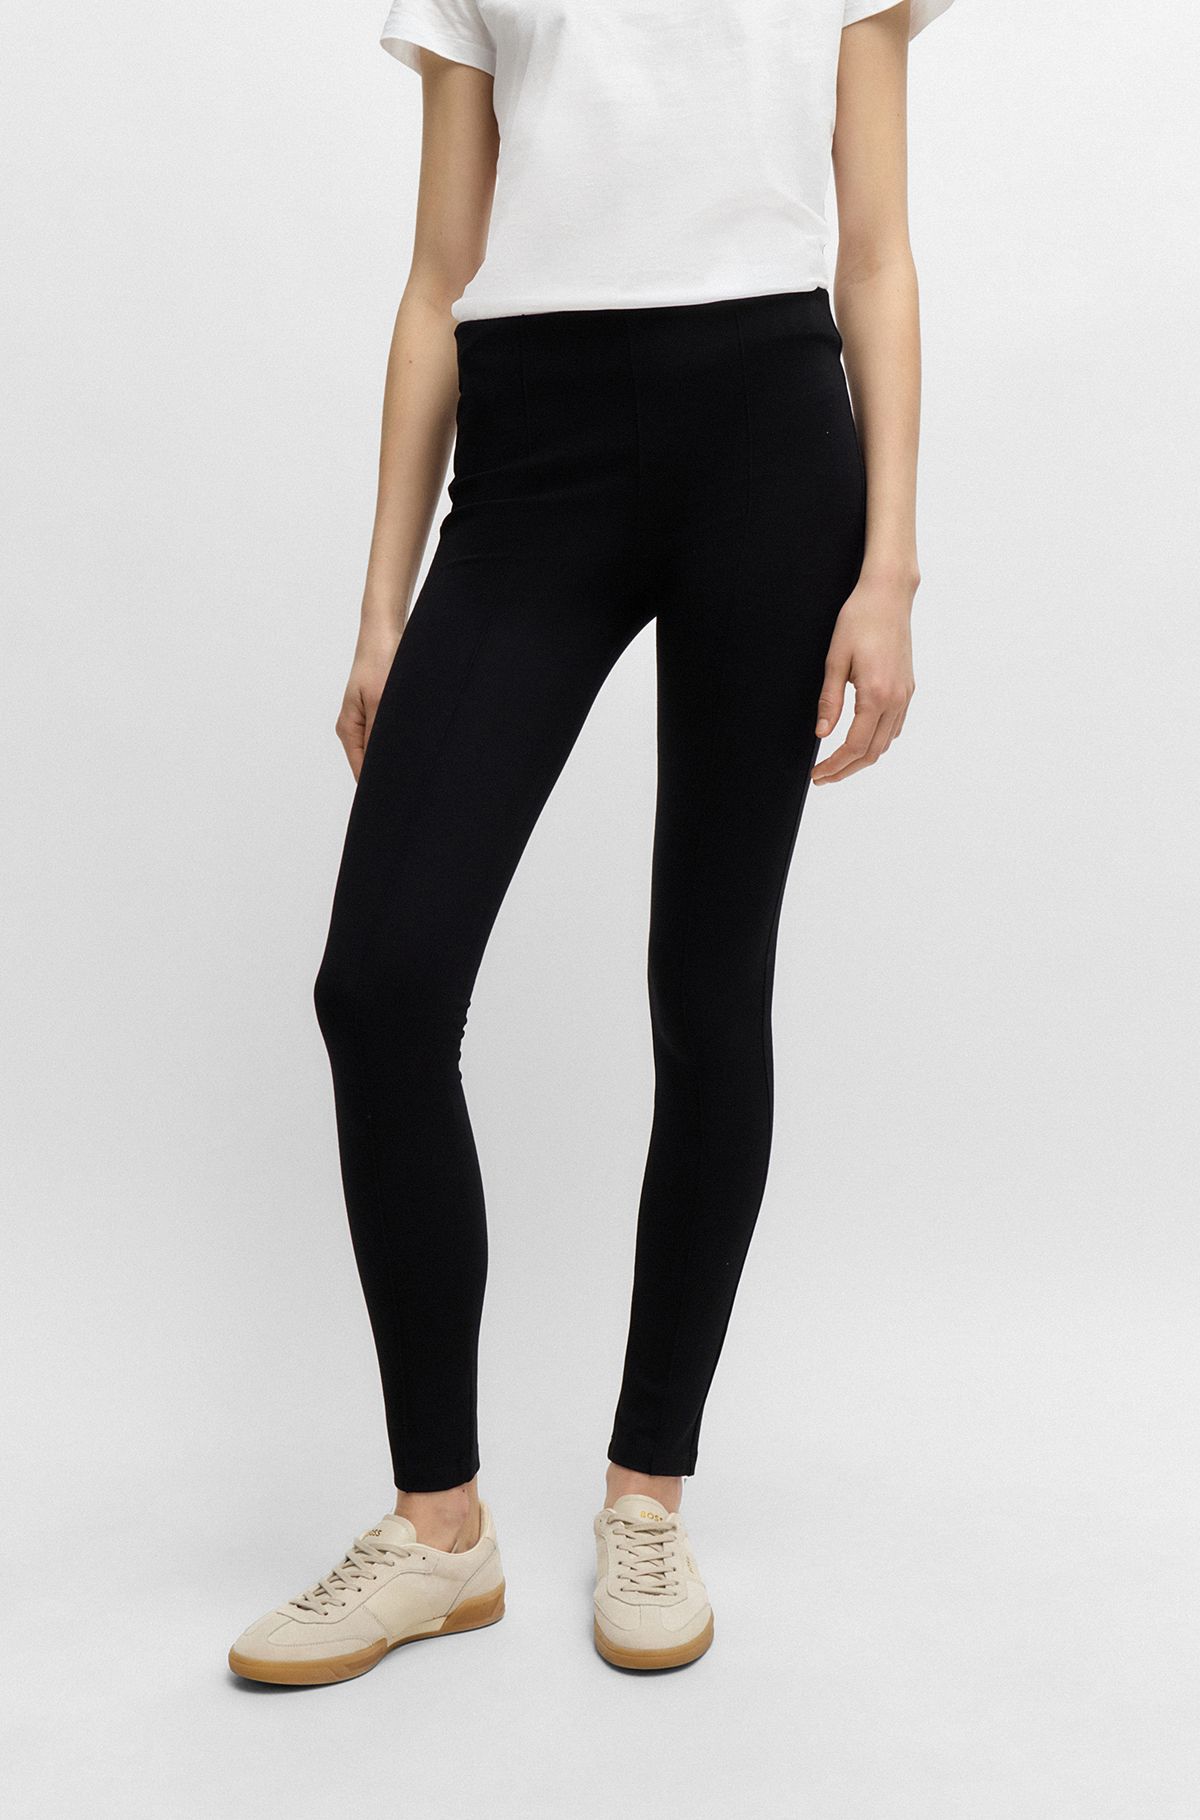 Extra-slim-fit trousers in stretch jersey, Black